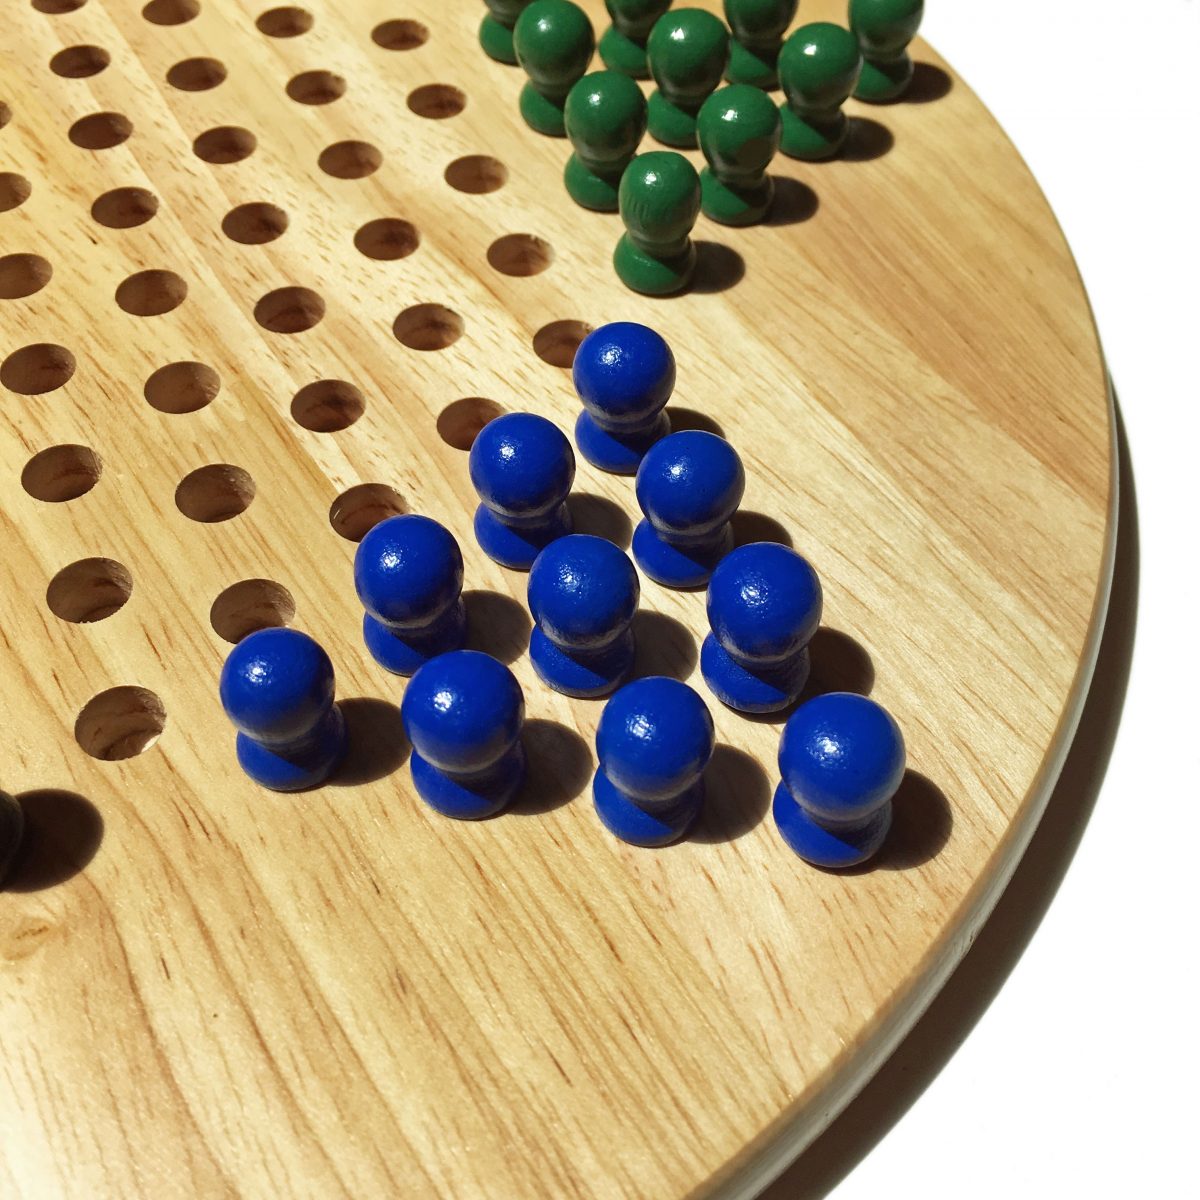 chinese checkers online multiplayer